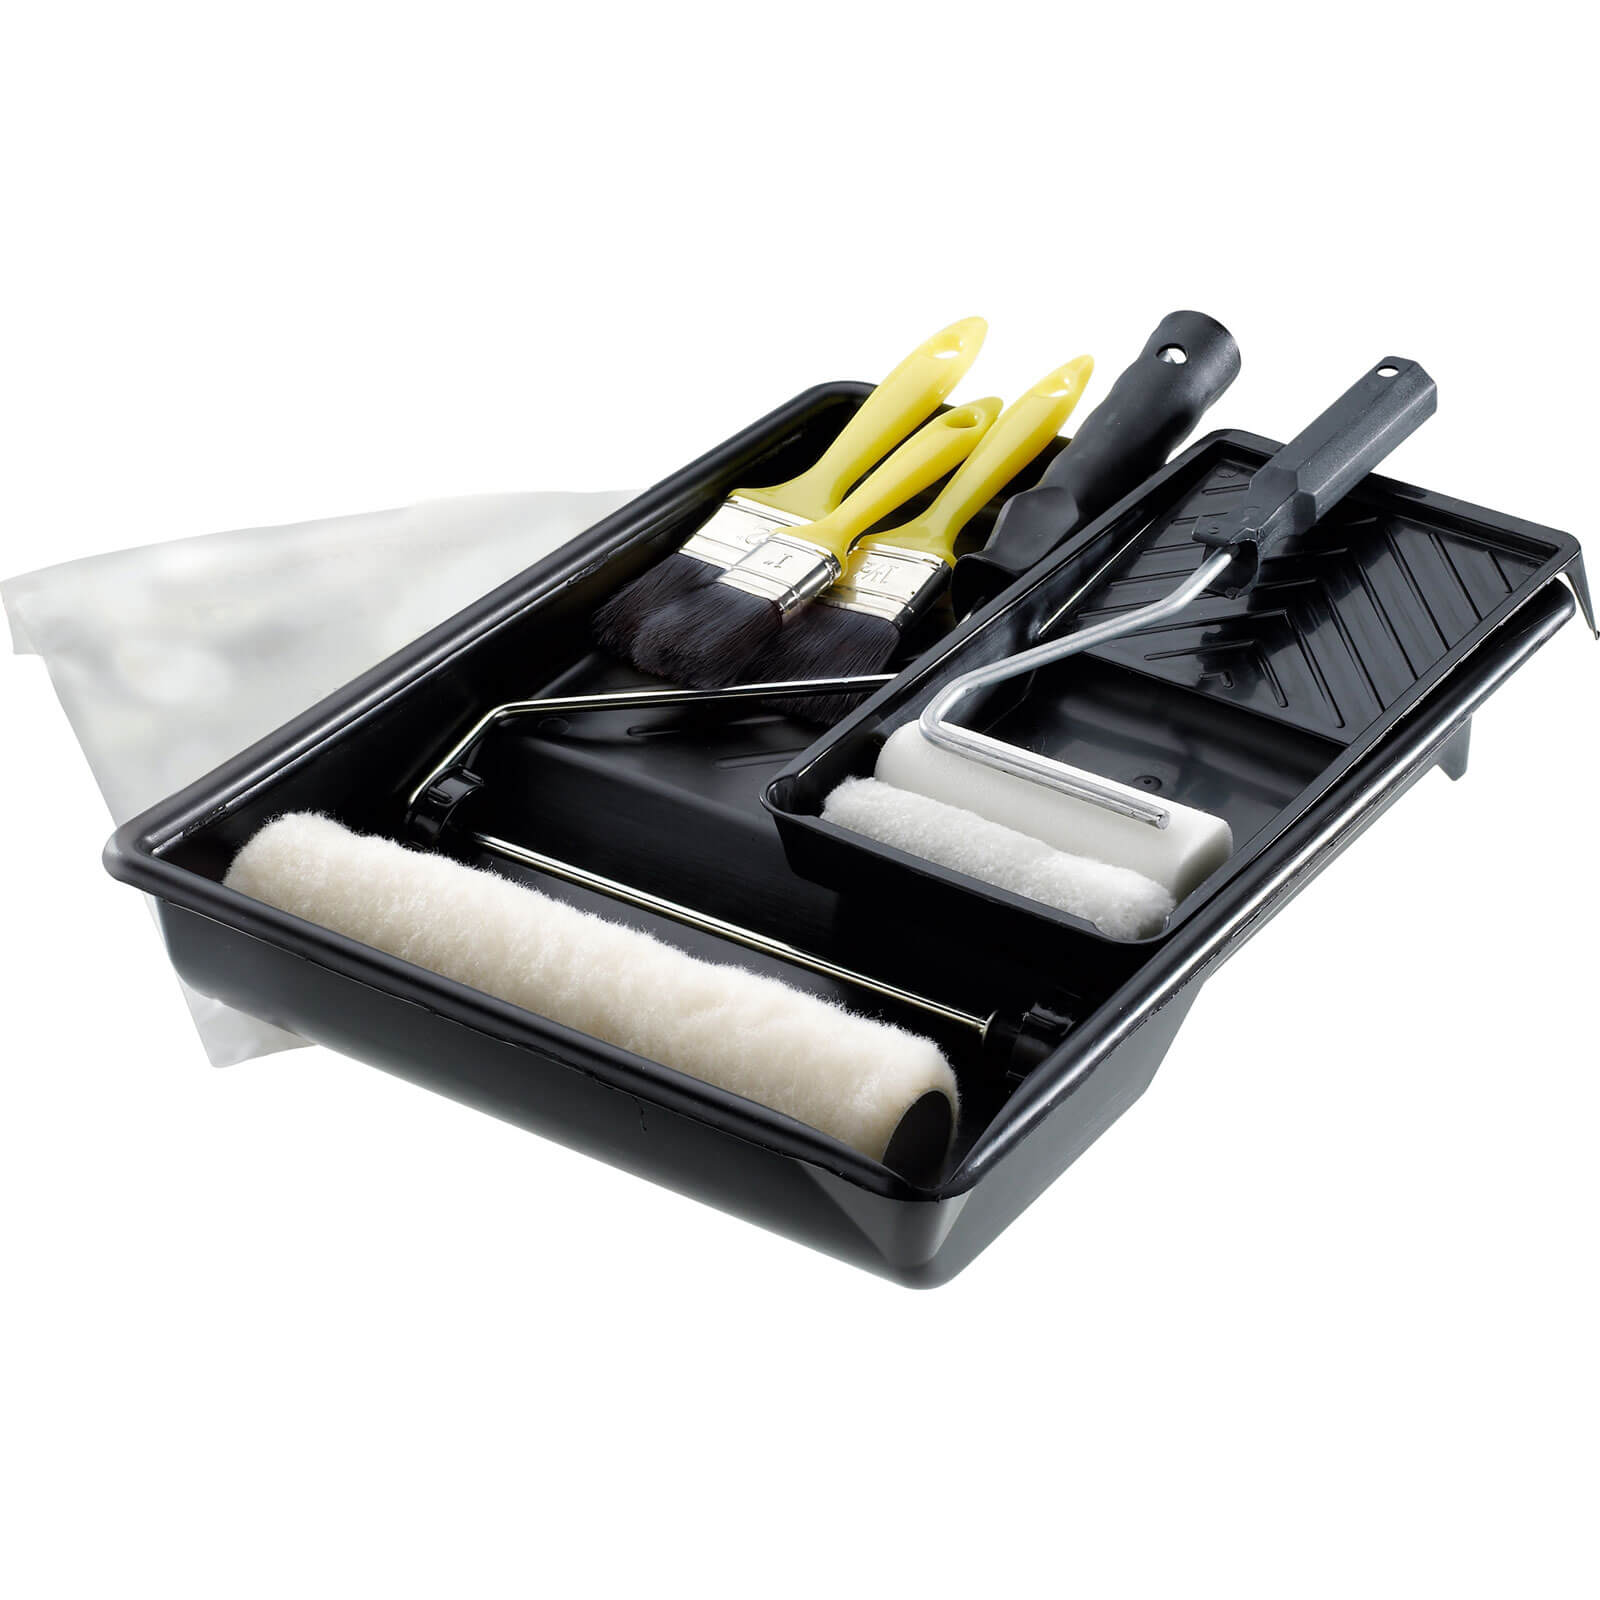 Image of Stanley 10 Piece Painting and Decorating Tool Set